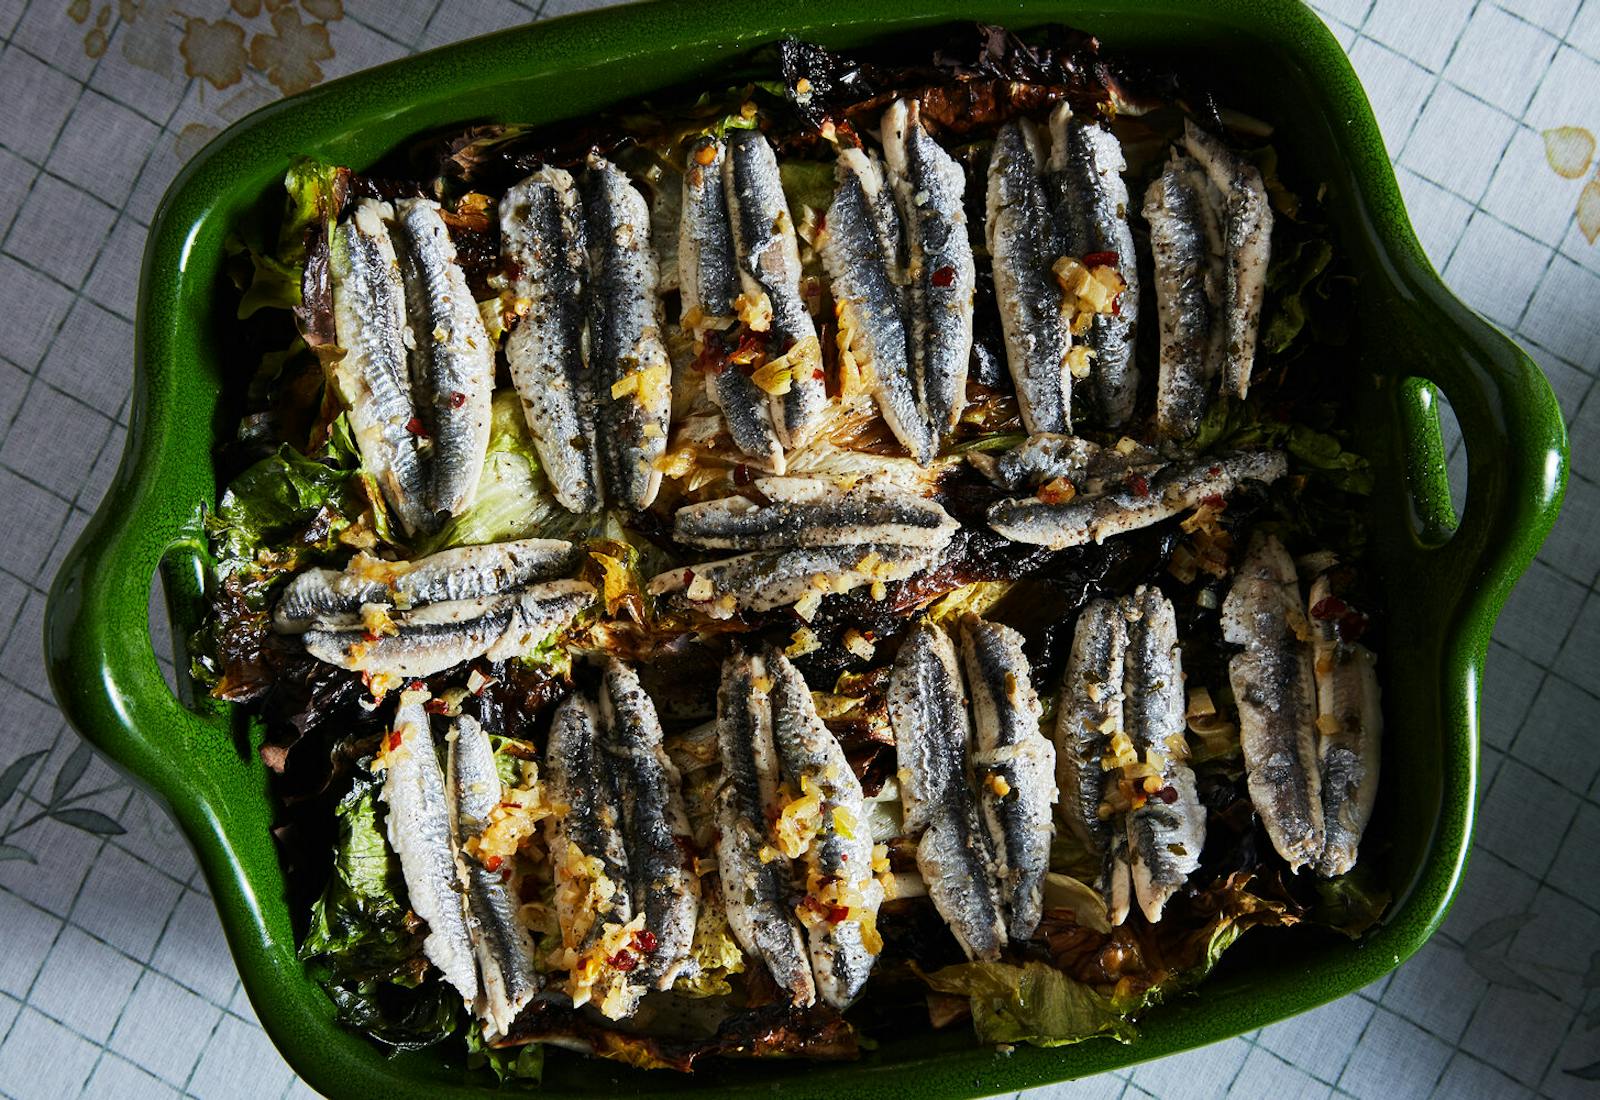 Baked anchovies on a bed of escarole garnished with red chili flakes in green casserole dish, atop grid-patterned tablecloth.